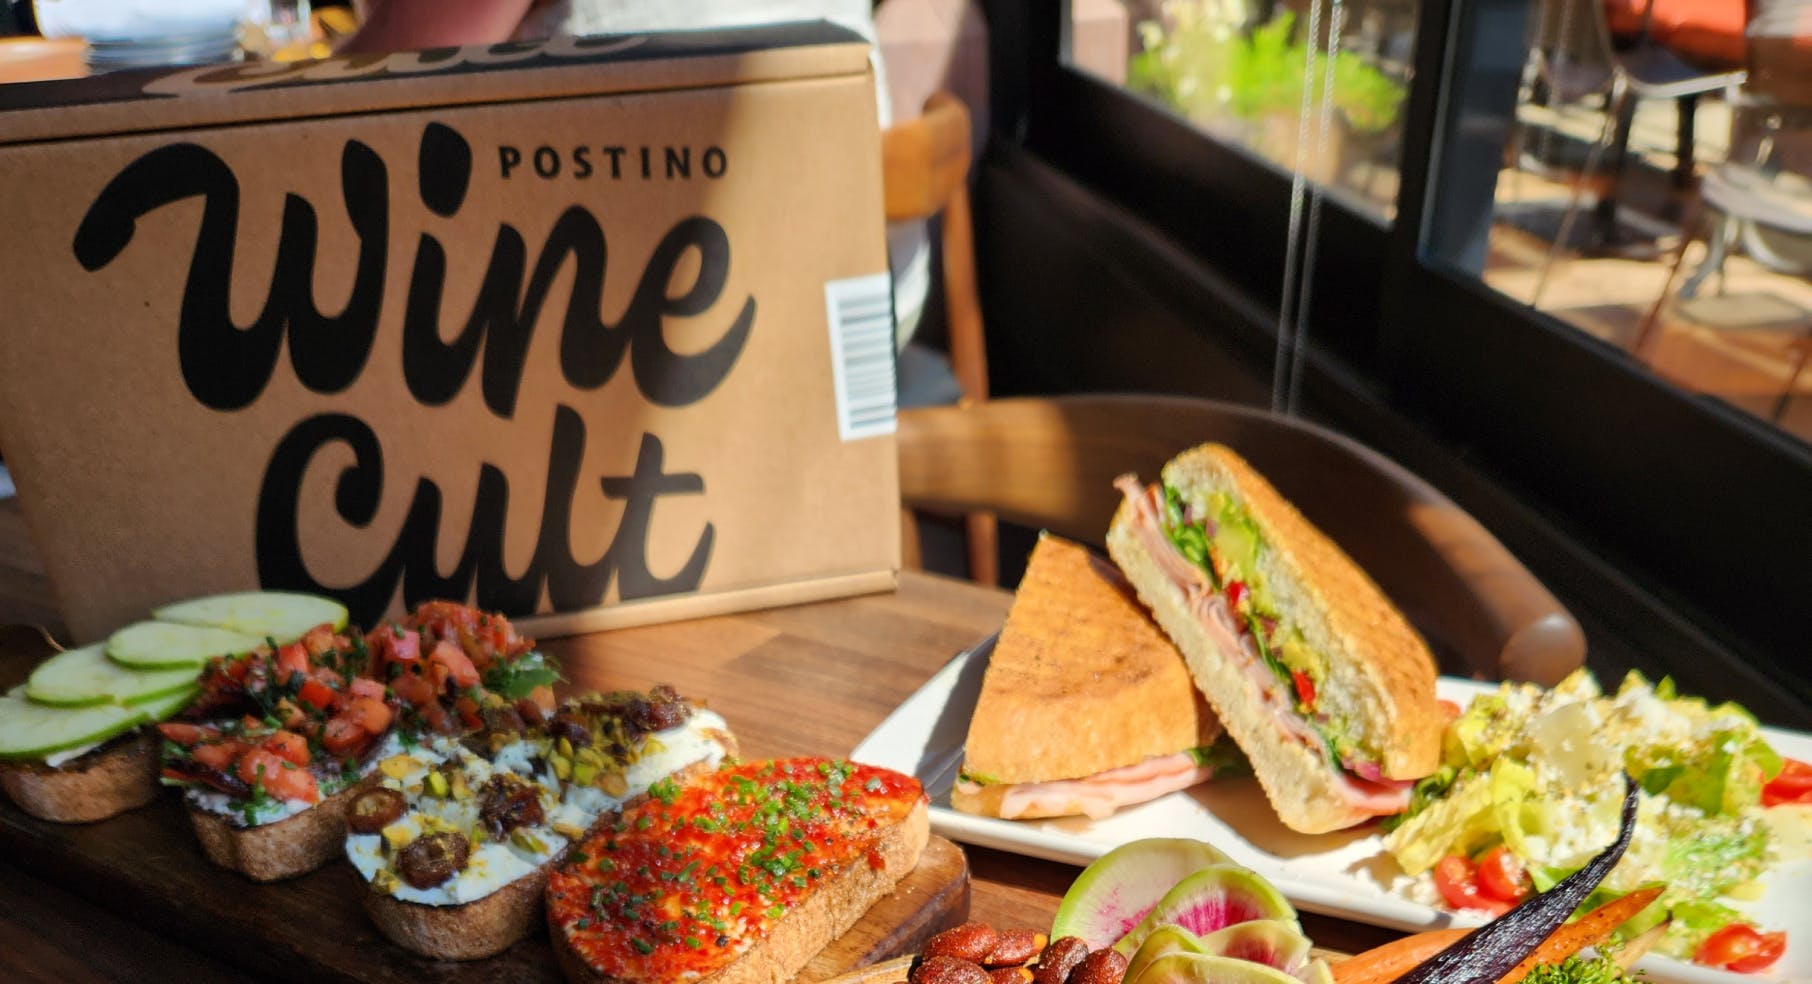 Winecult box next to a sandwich